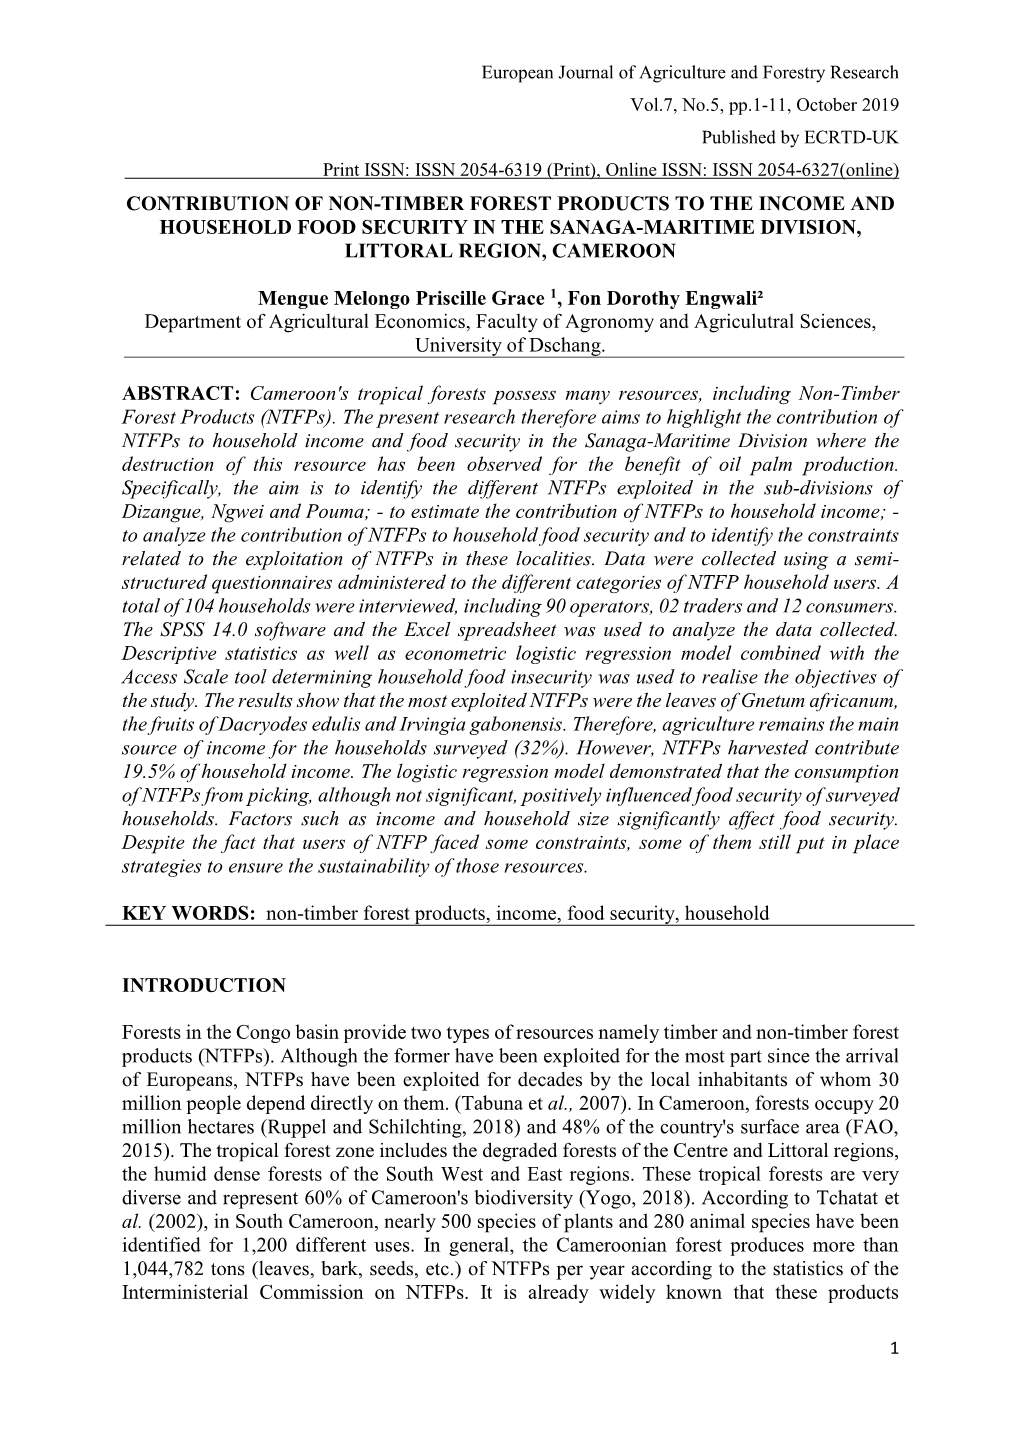 Contribution of Non-Timber Forest Products to the Income and Household Food Security in the Sanaga-Maritime Division, Littoral Region, Cameroon